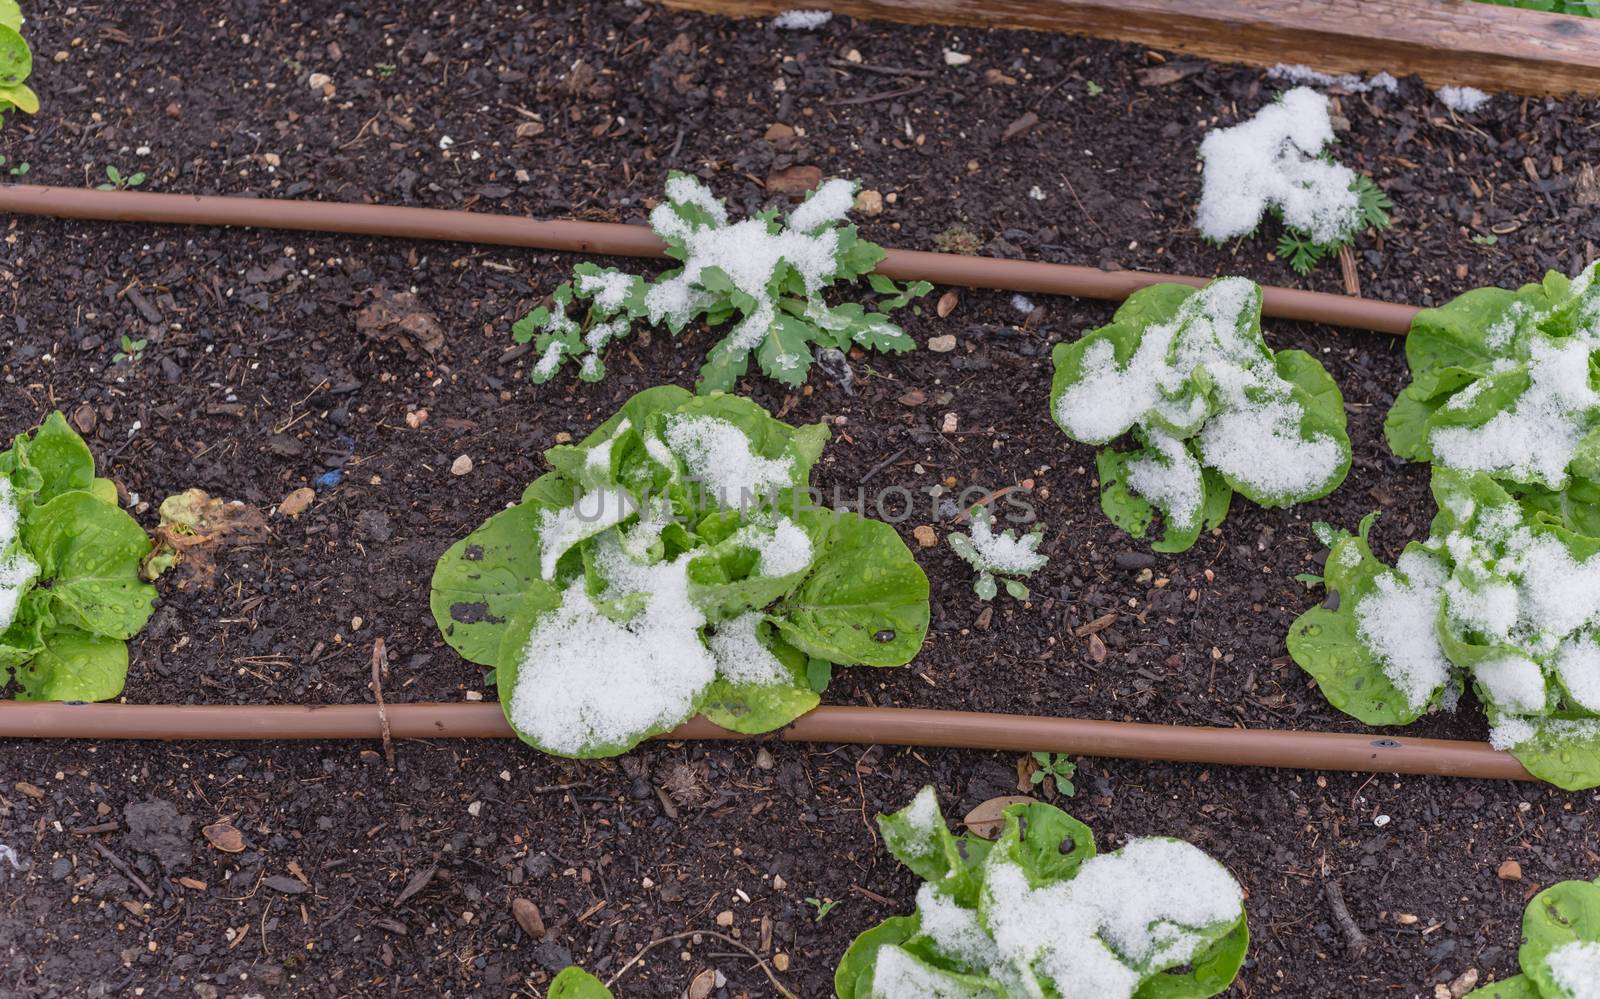 Lettuce plants under snow covered at raised bed garden near Dallas, Texas, USA by trongnguyen